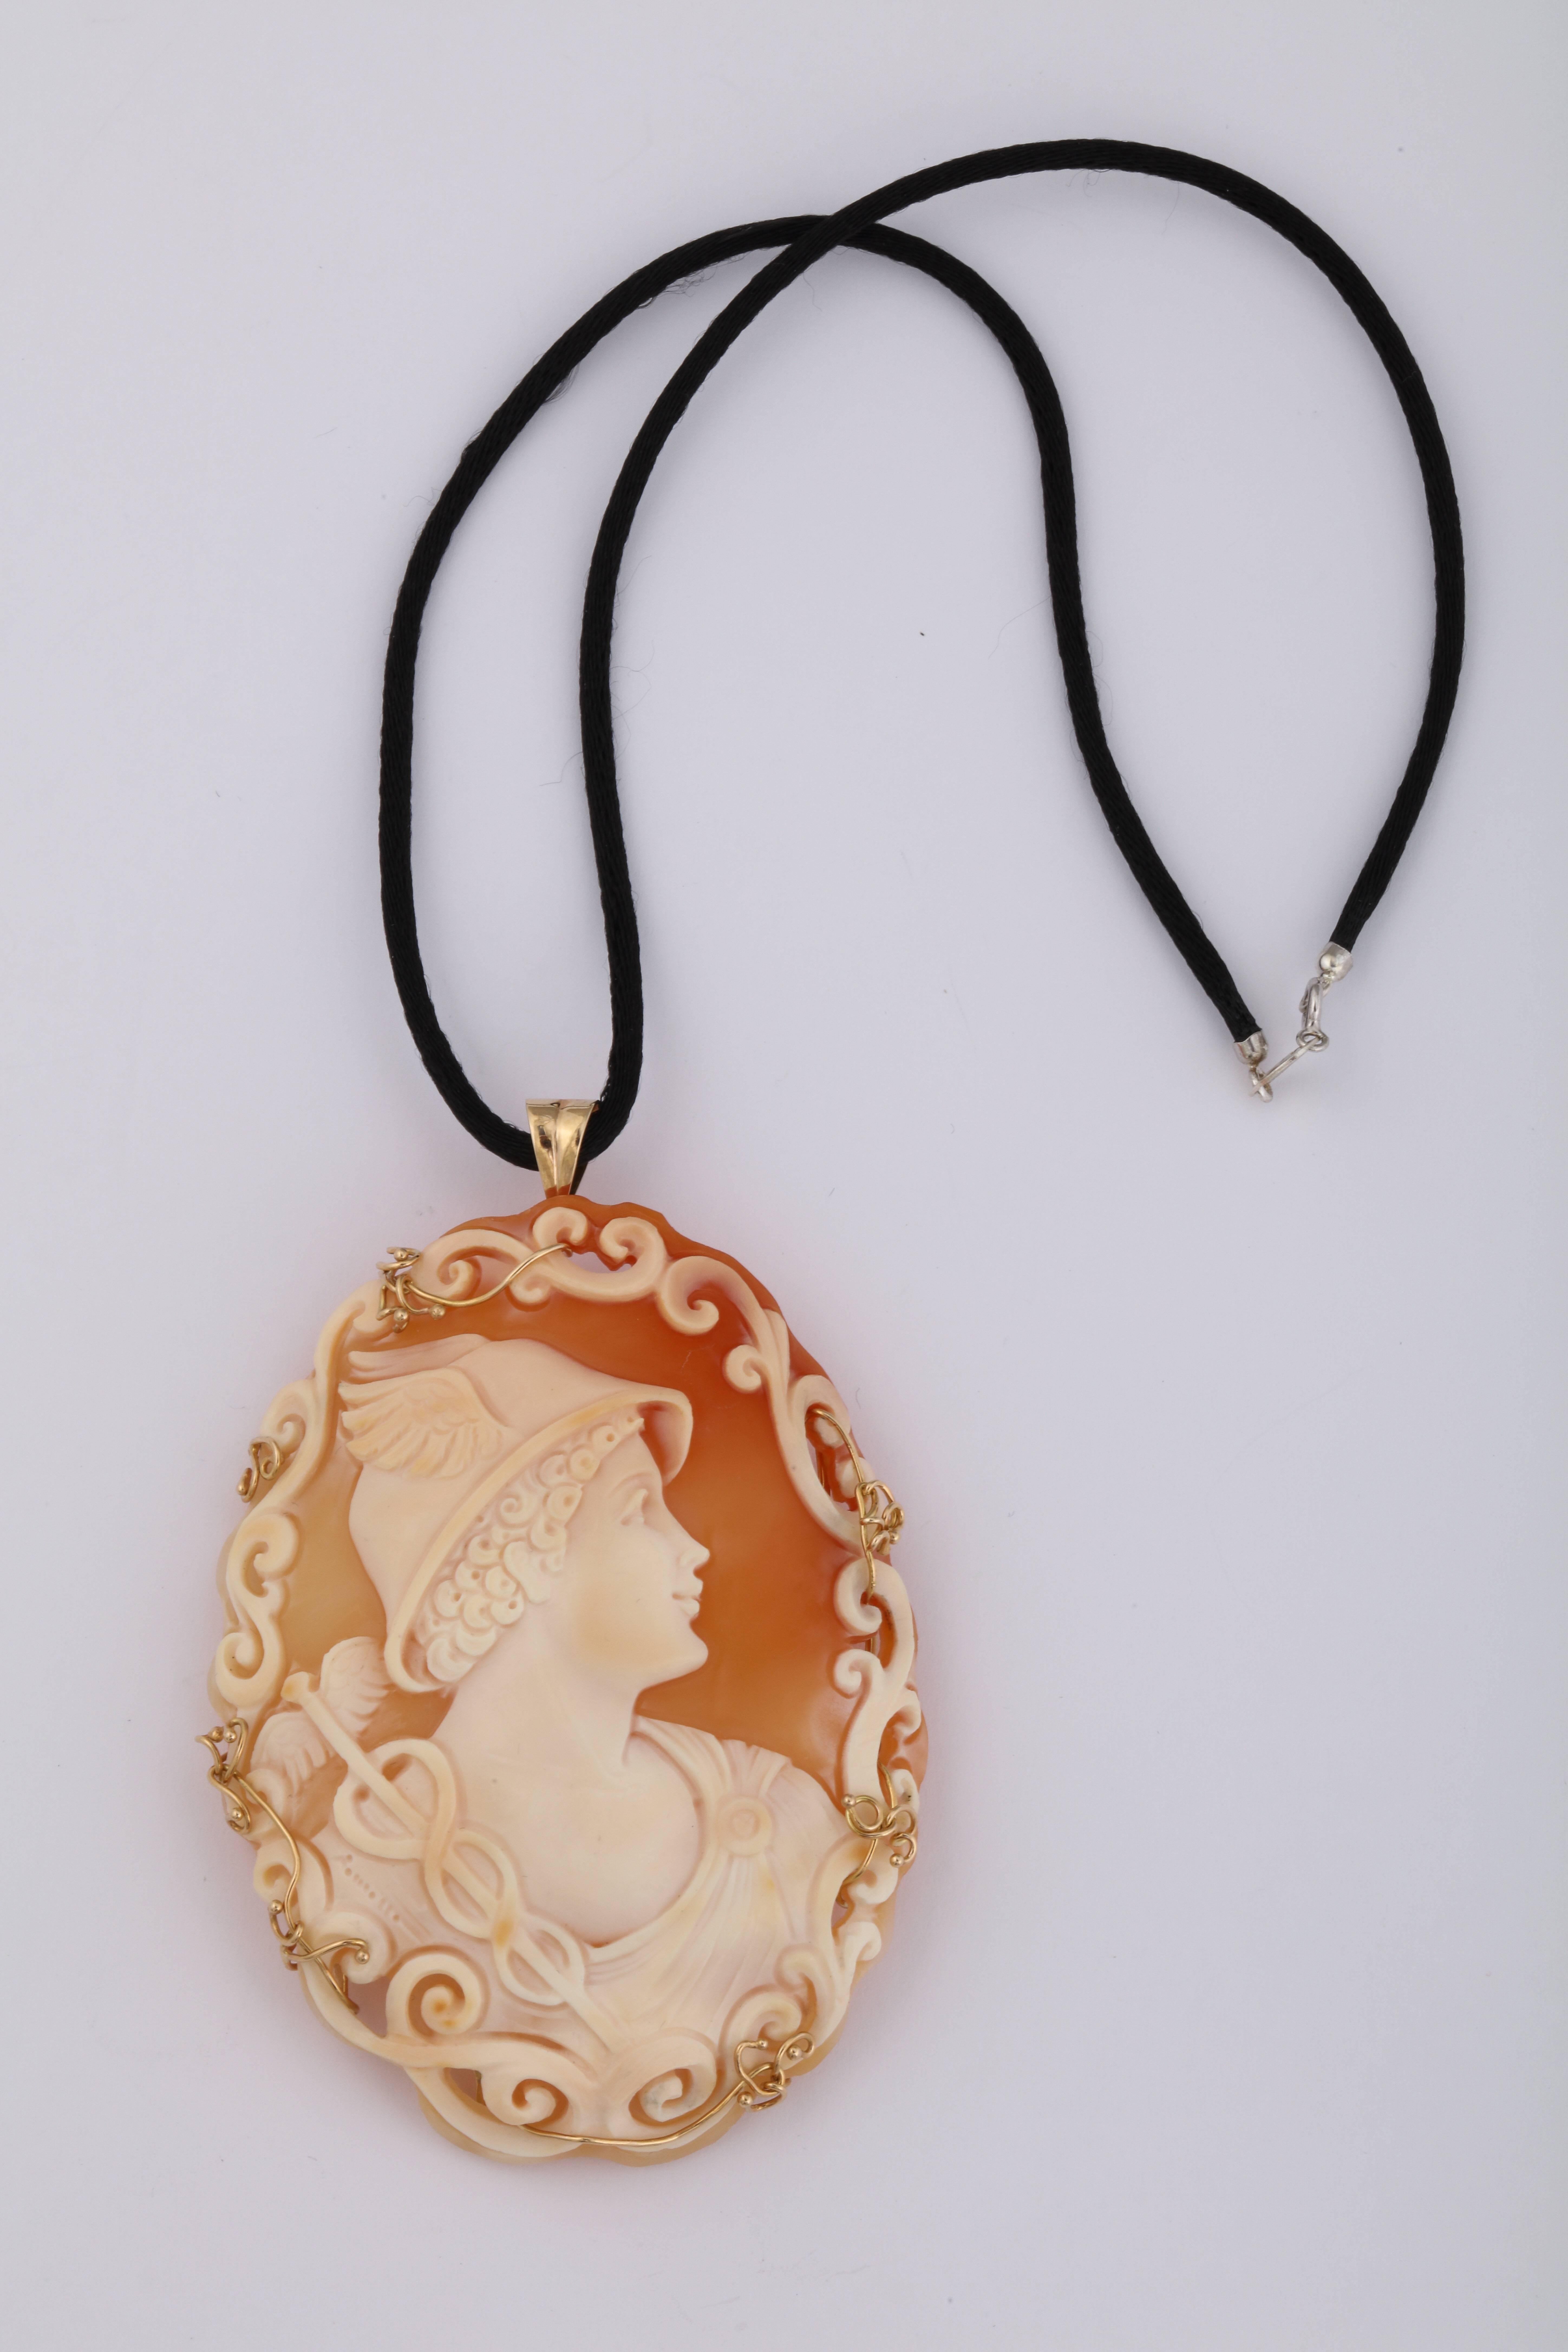 85mm Cornelian shell cameo hand-carved with 14kt yellow gold and 18